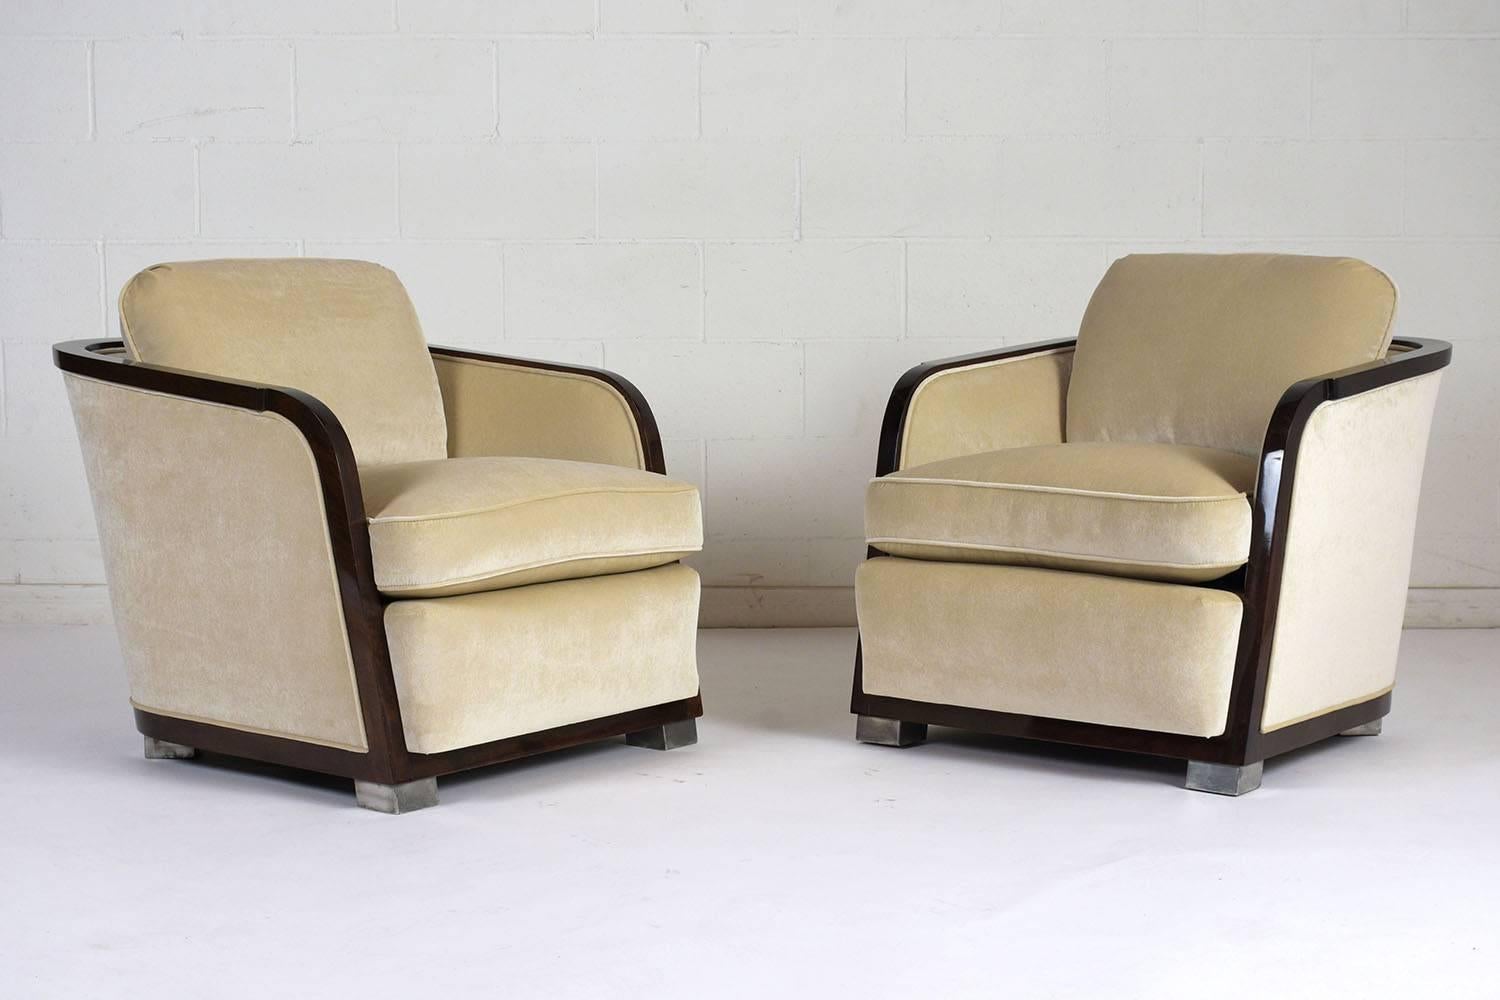 This pair of 1960s Art Deco-style club chairs have a curved profile with a rosewood color wood frame with a lacquered finish. The chairs are upholstered on the back, seat, and front edge in a beige color velvet fabric with single piping trim